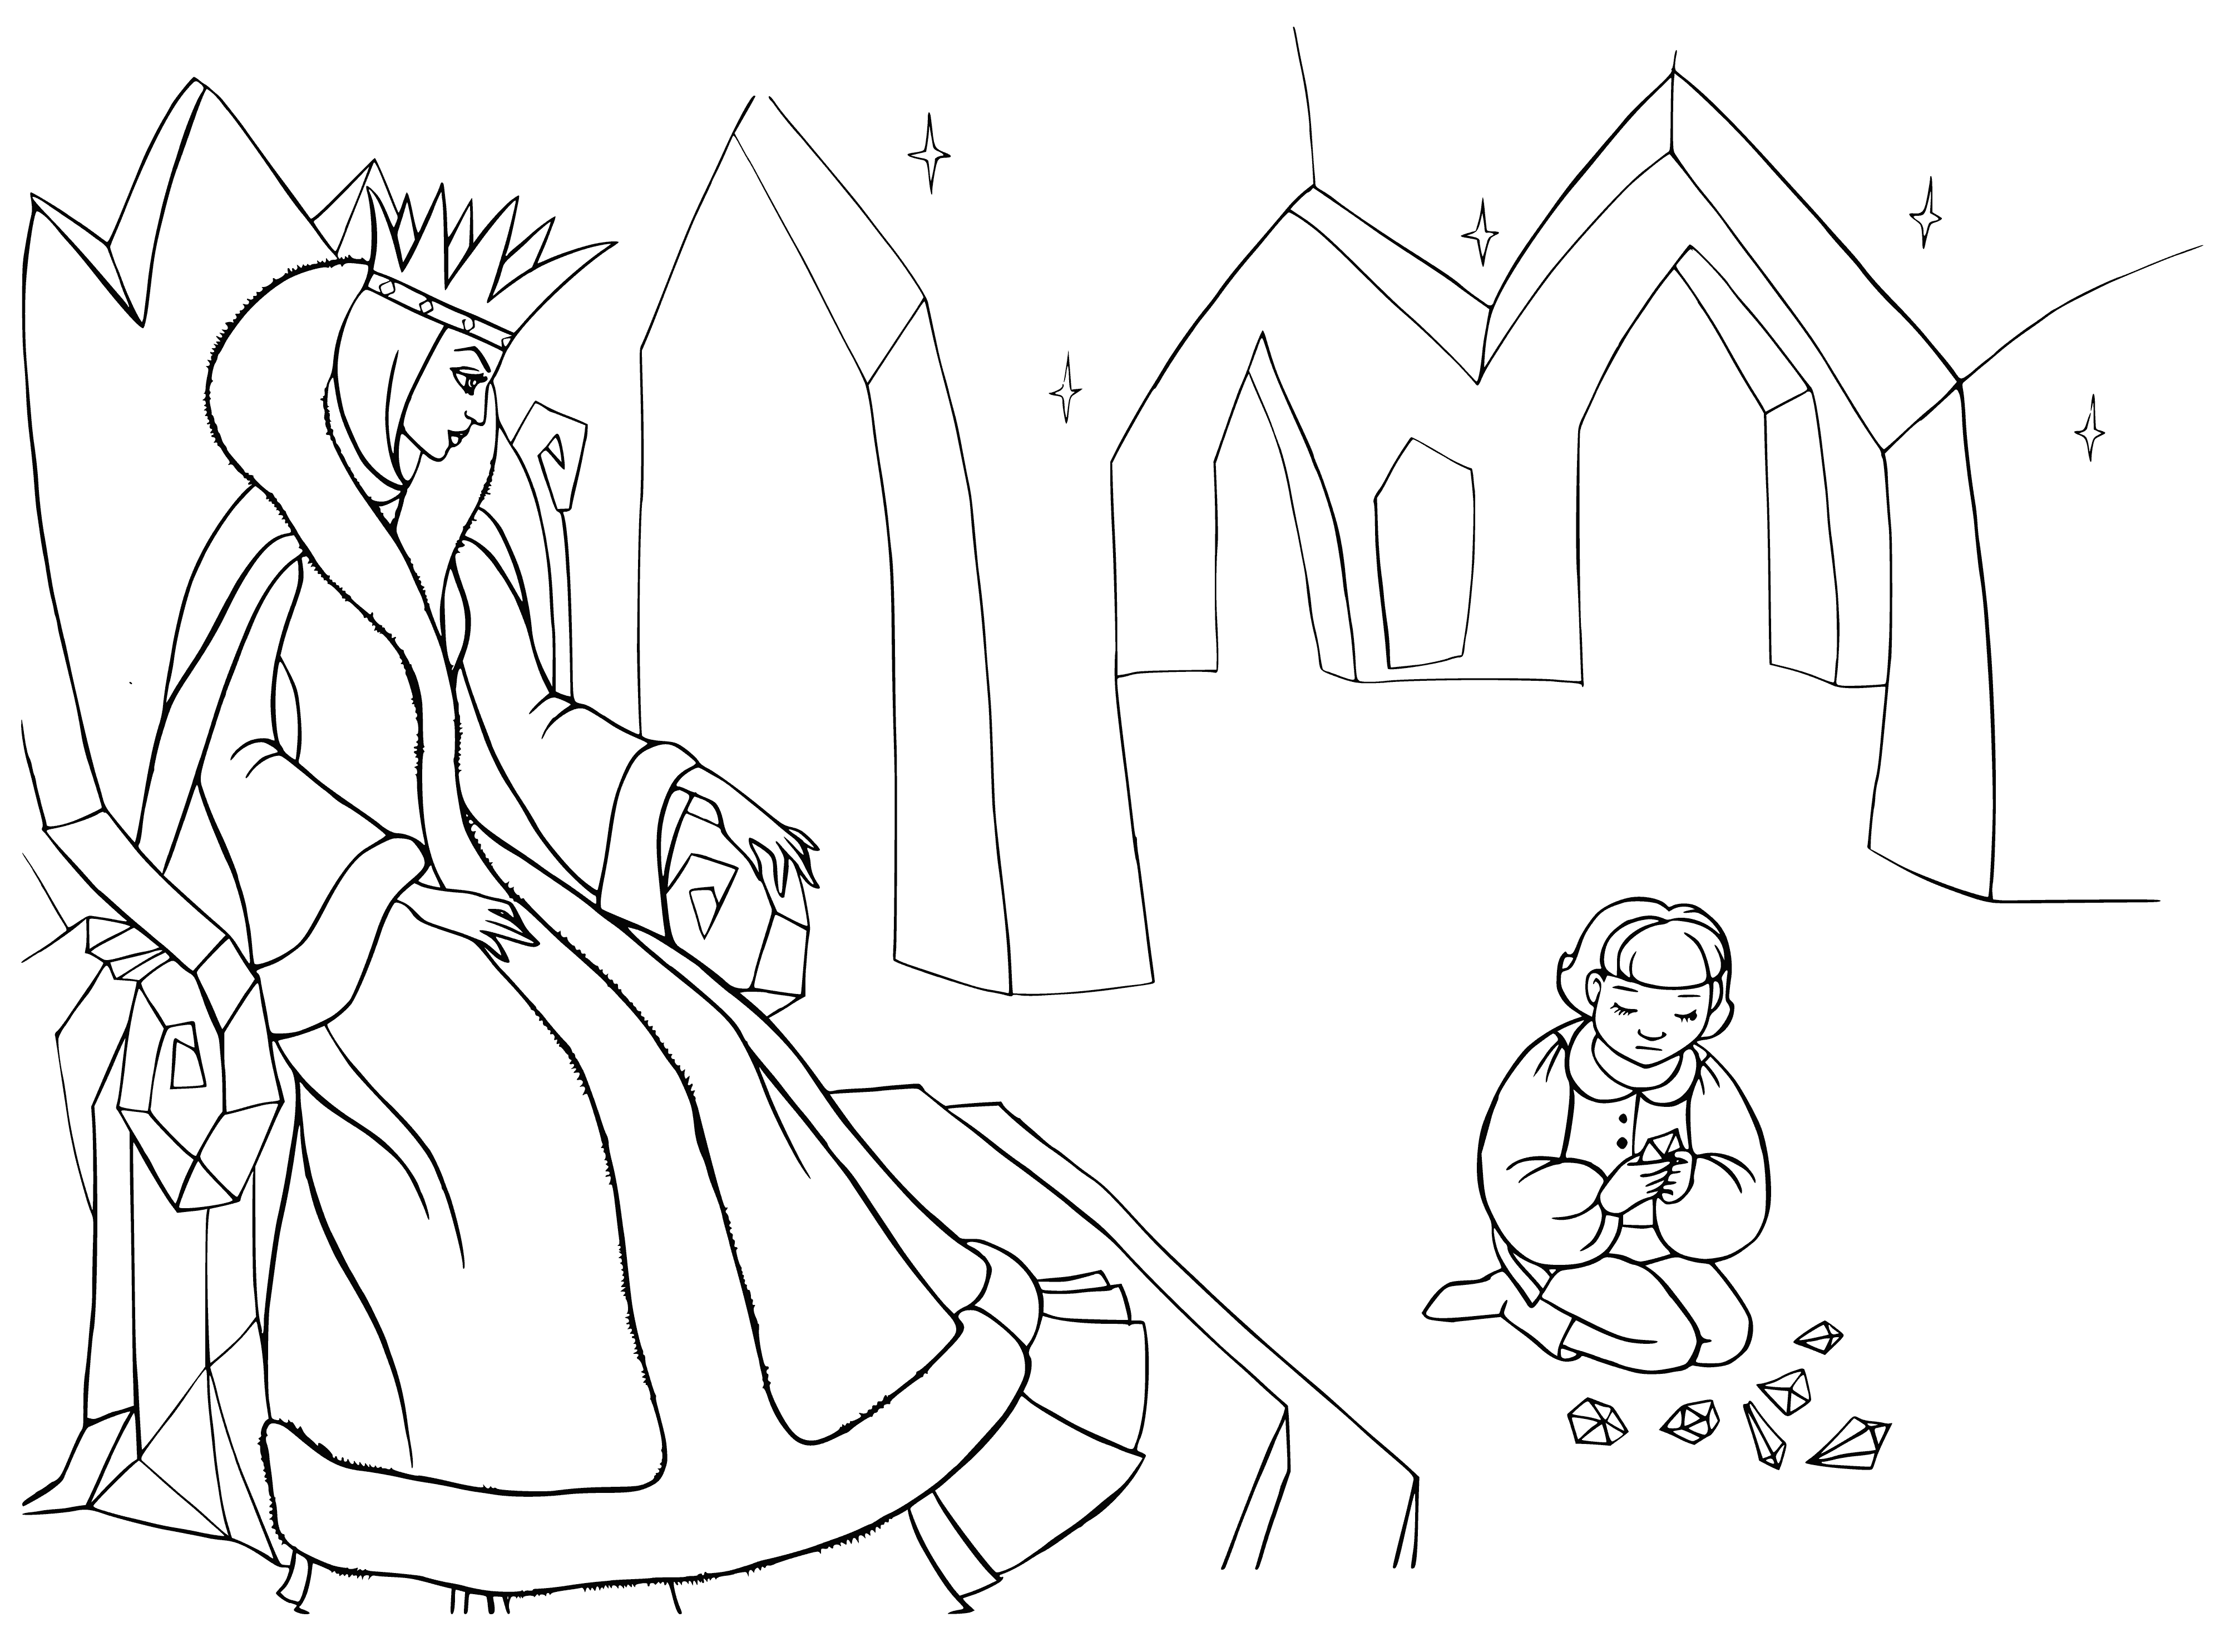 The Snow Queen coloring page